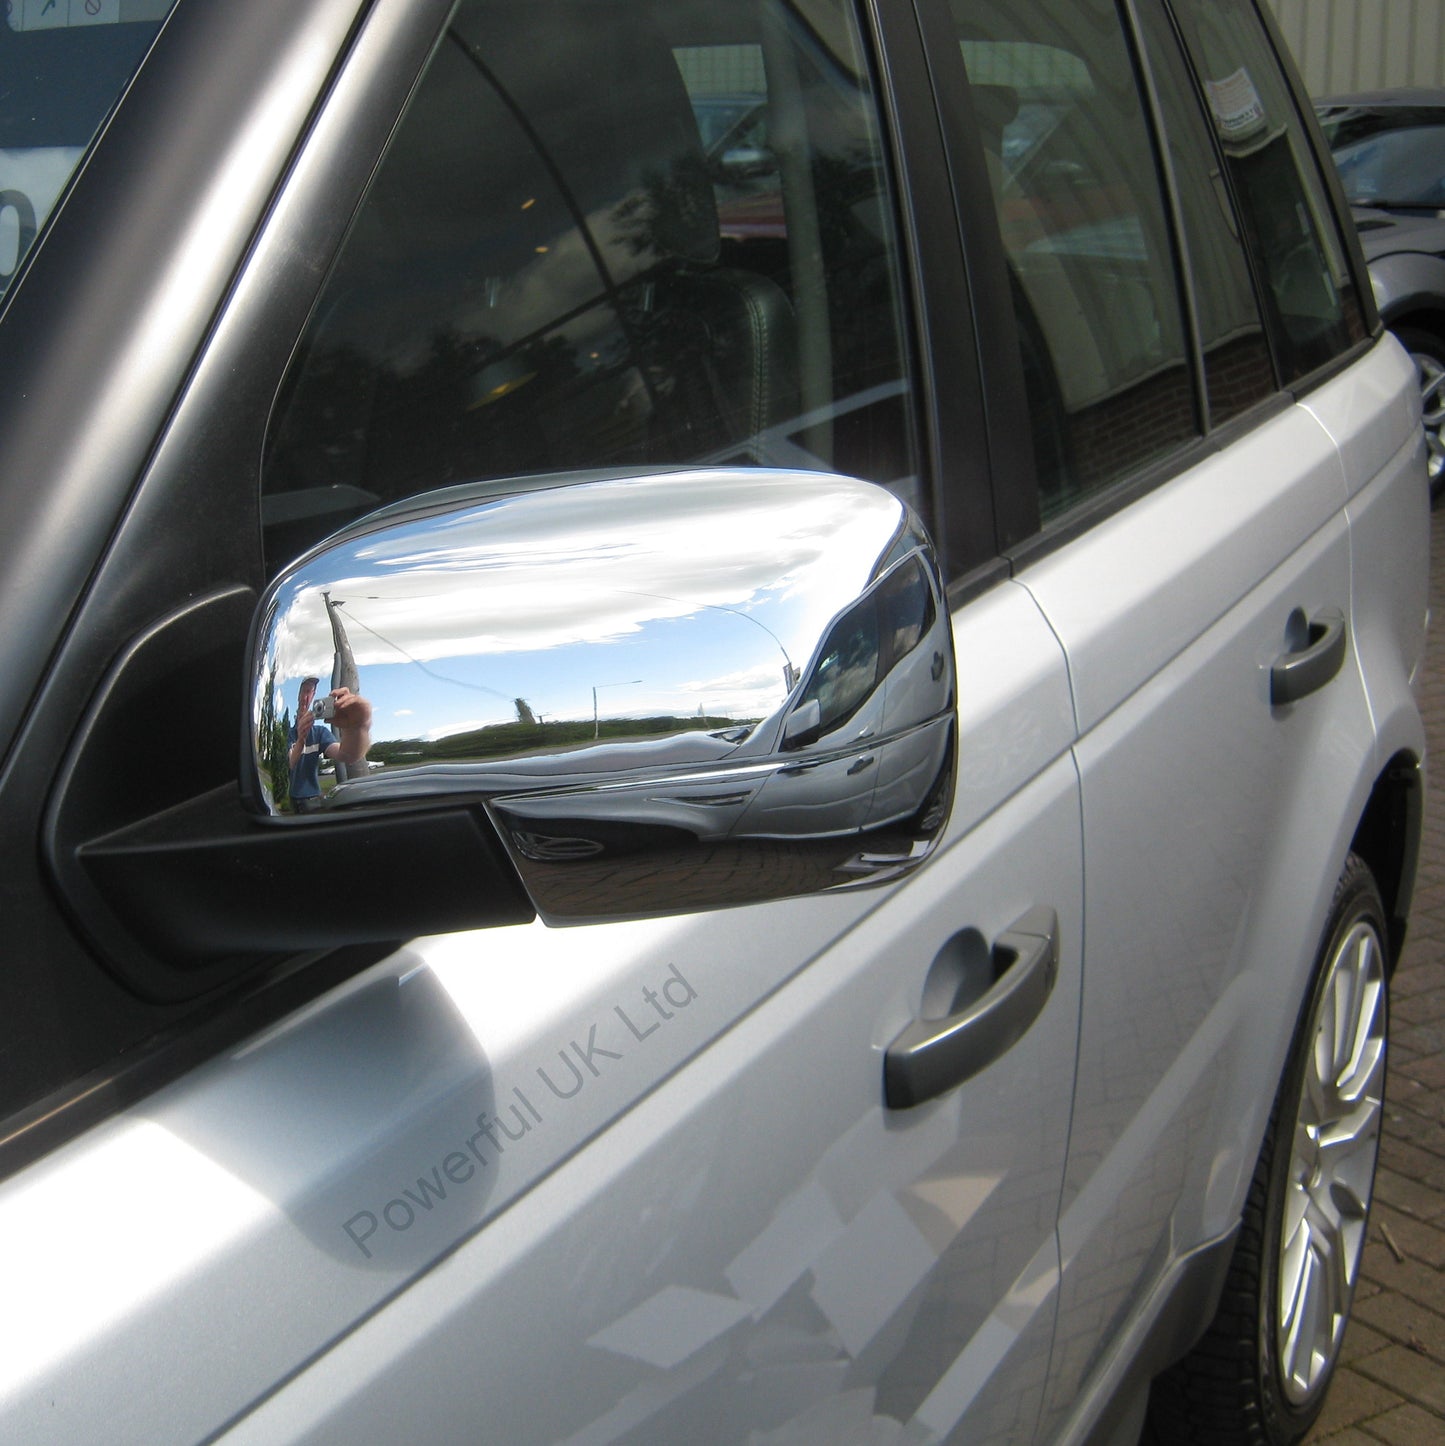 Full Wing Mirror Covers for Land Rover Freelander 2 (2010 on mirrors) - Chrome